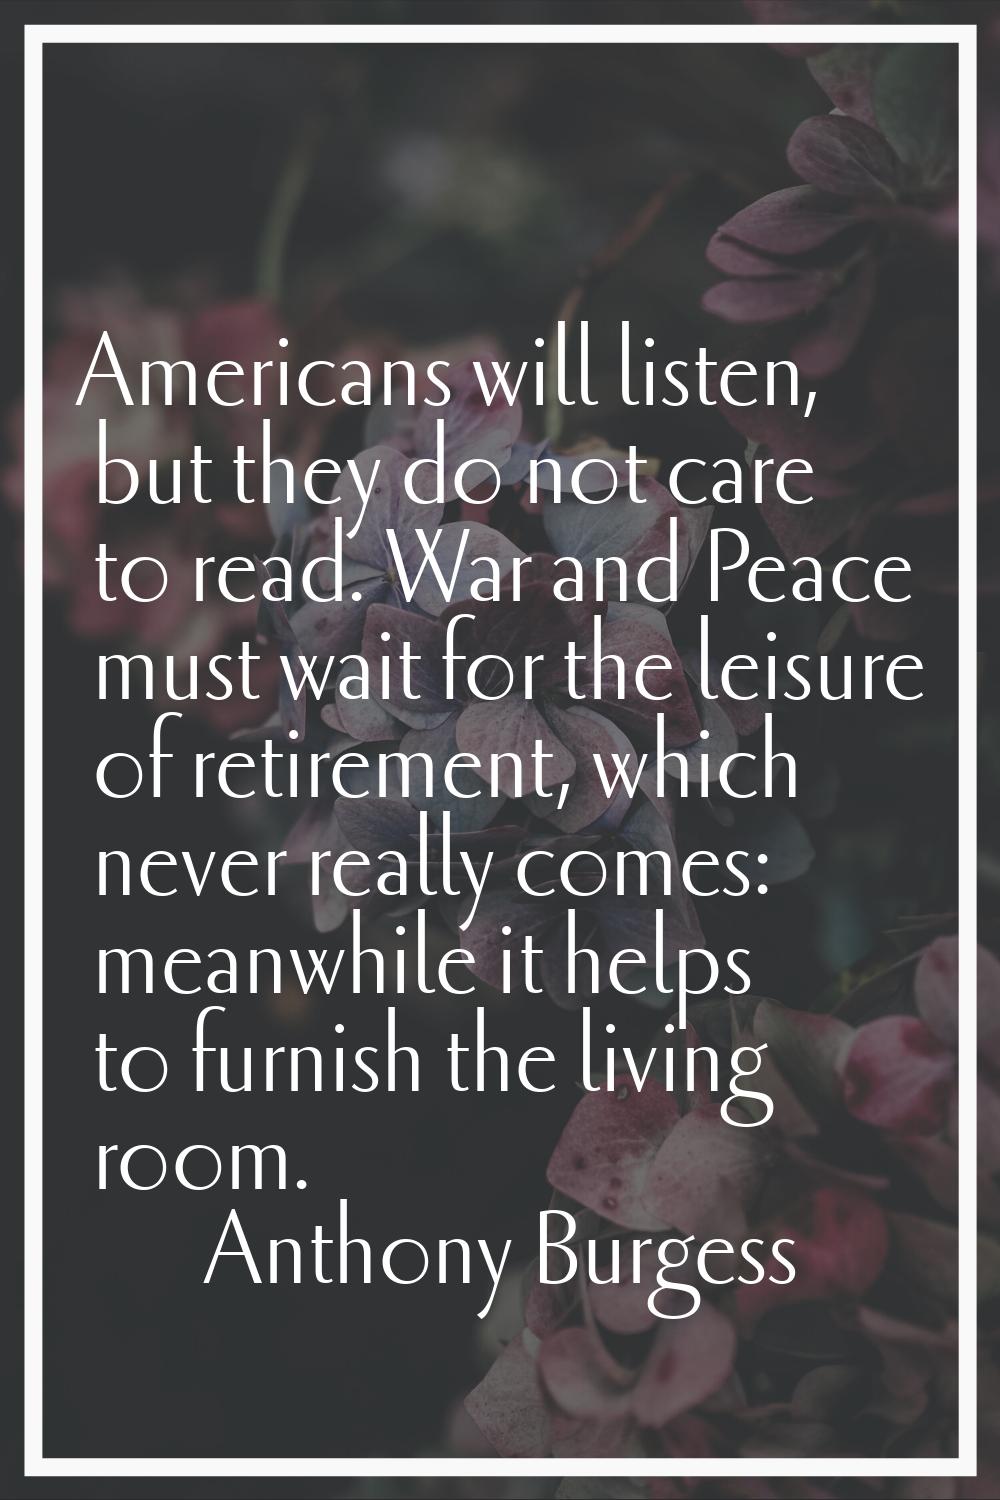 Americans will listen, but they do not care to read. War and Peace must wait for the leisure of ret